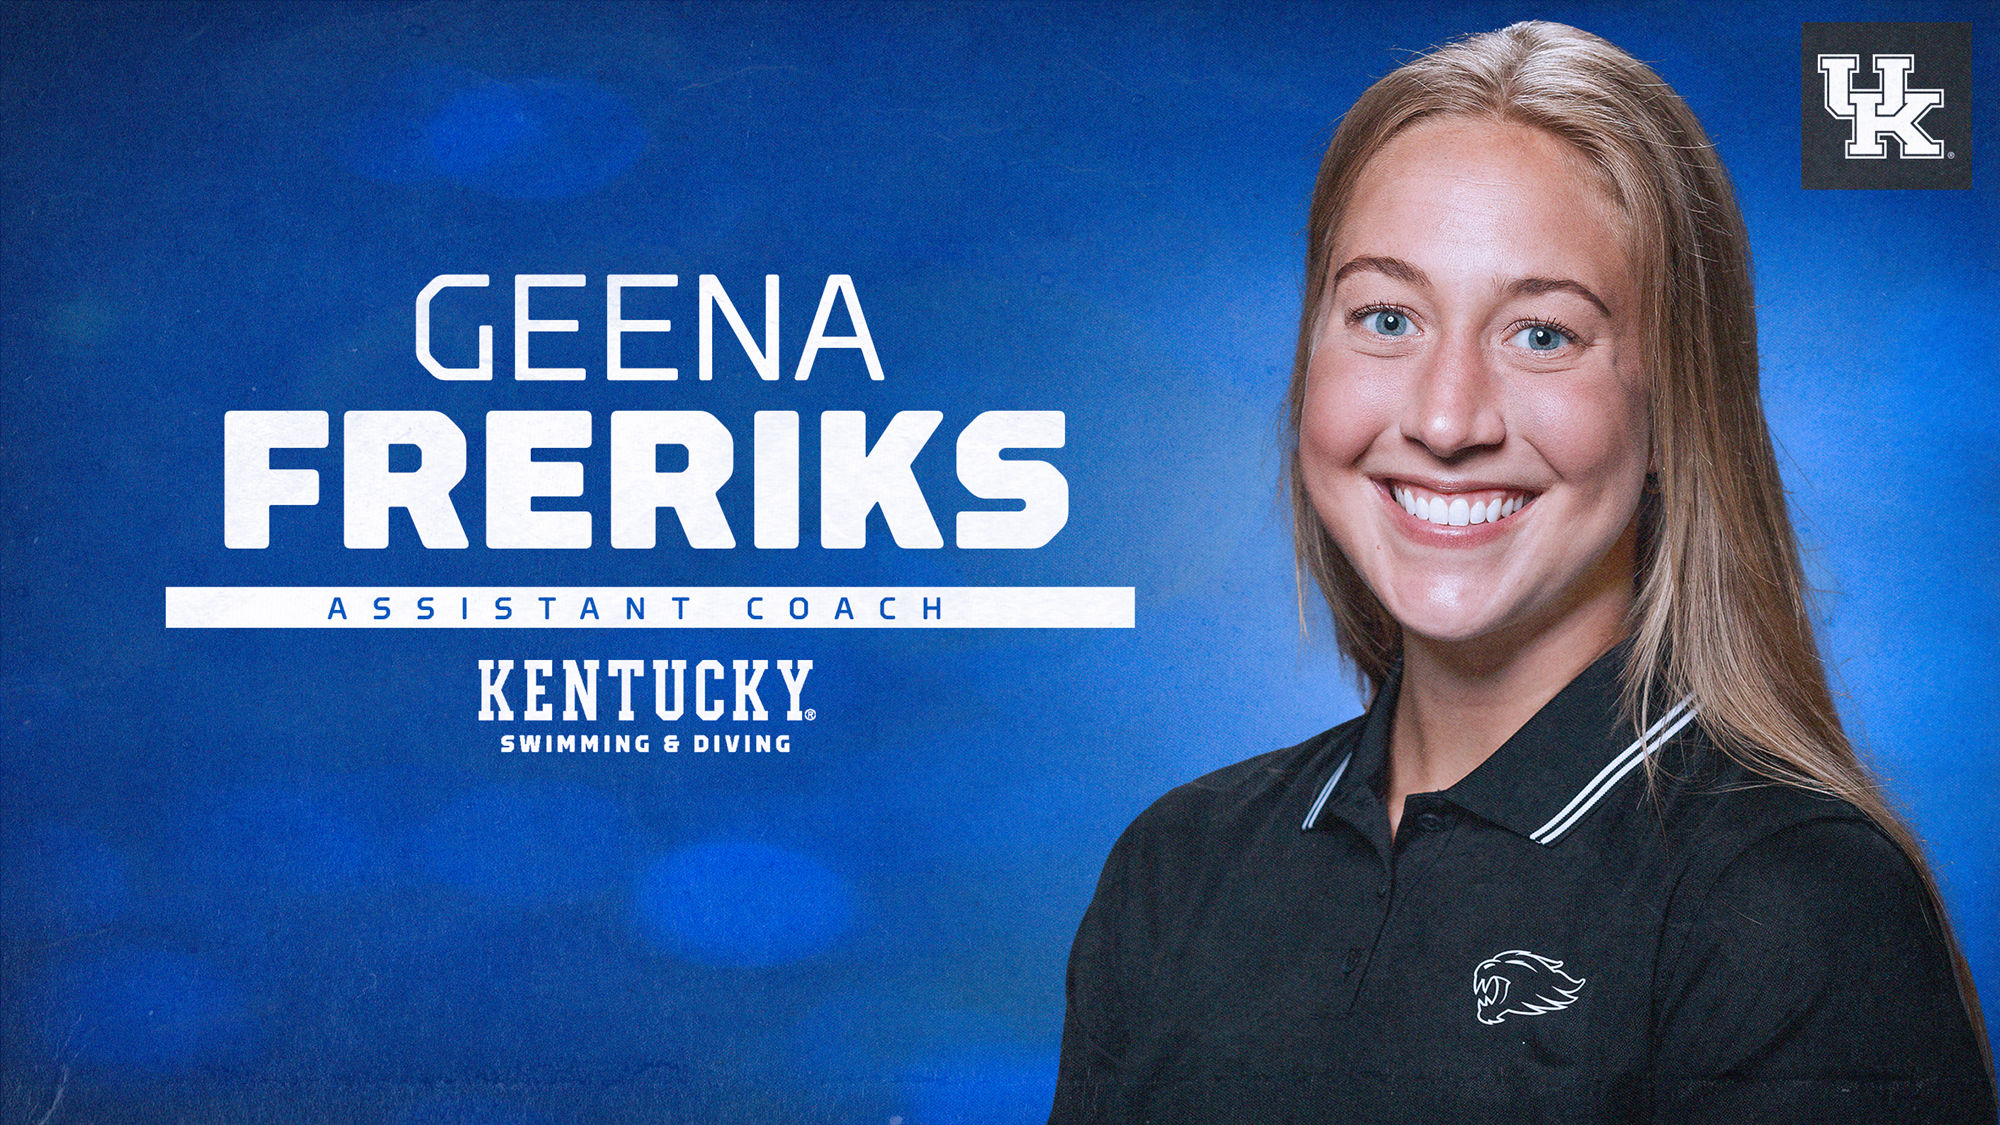 Geena Freriks Returns to Kentucky as Swimming & Diving Assistant Coach